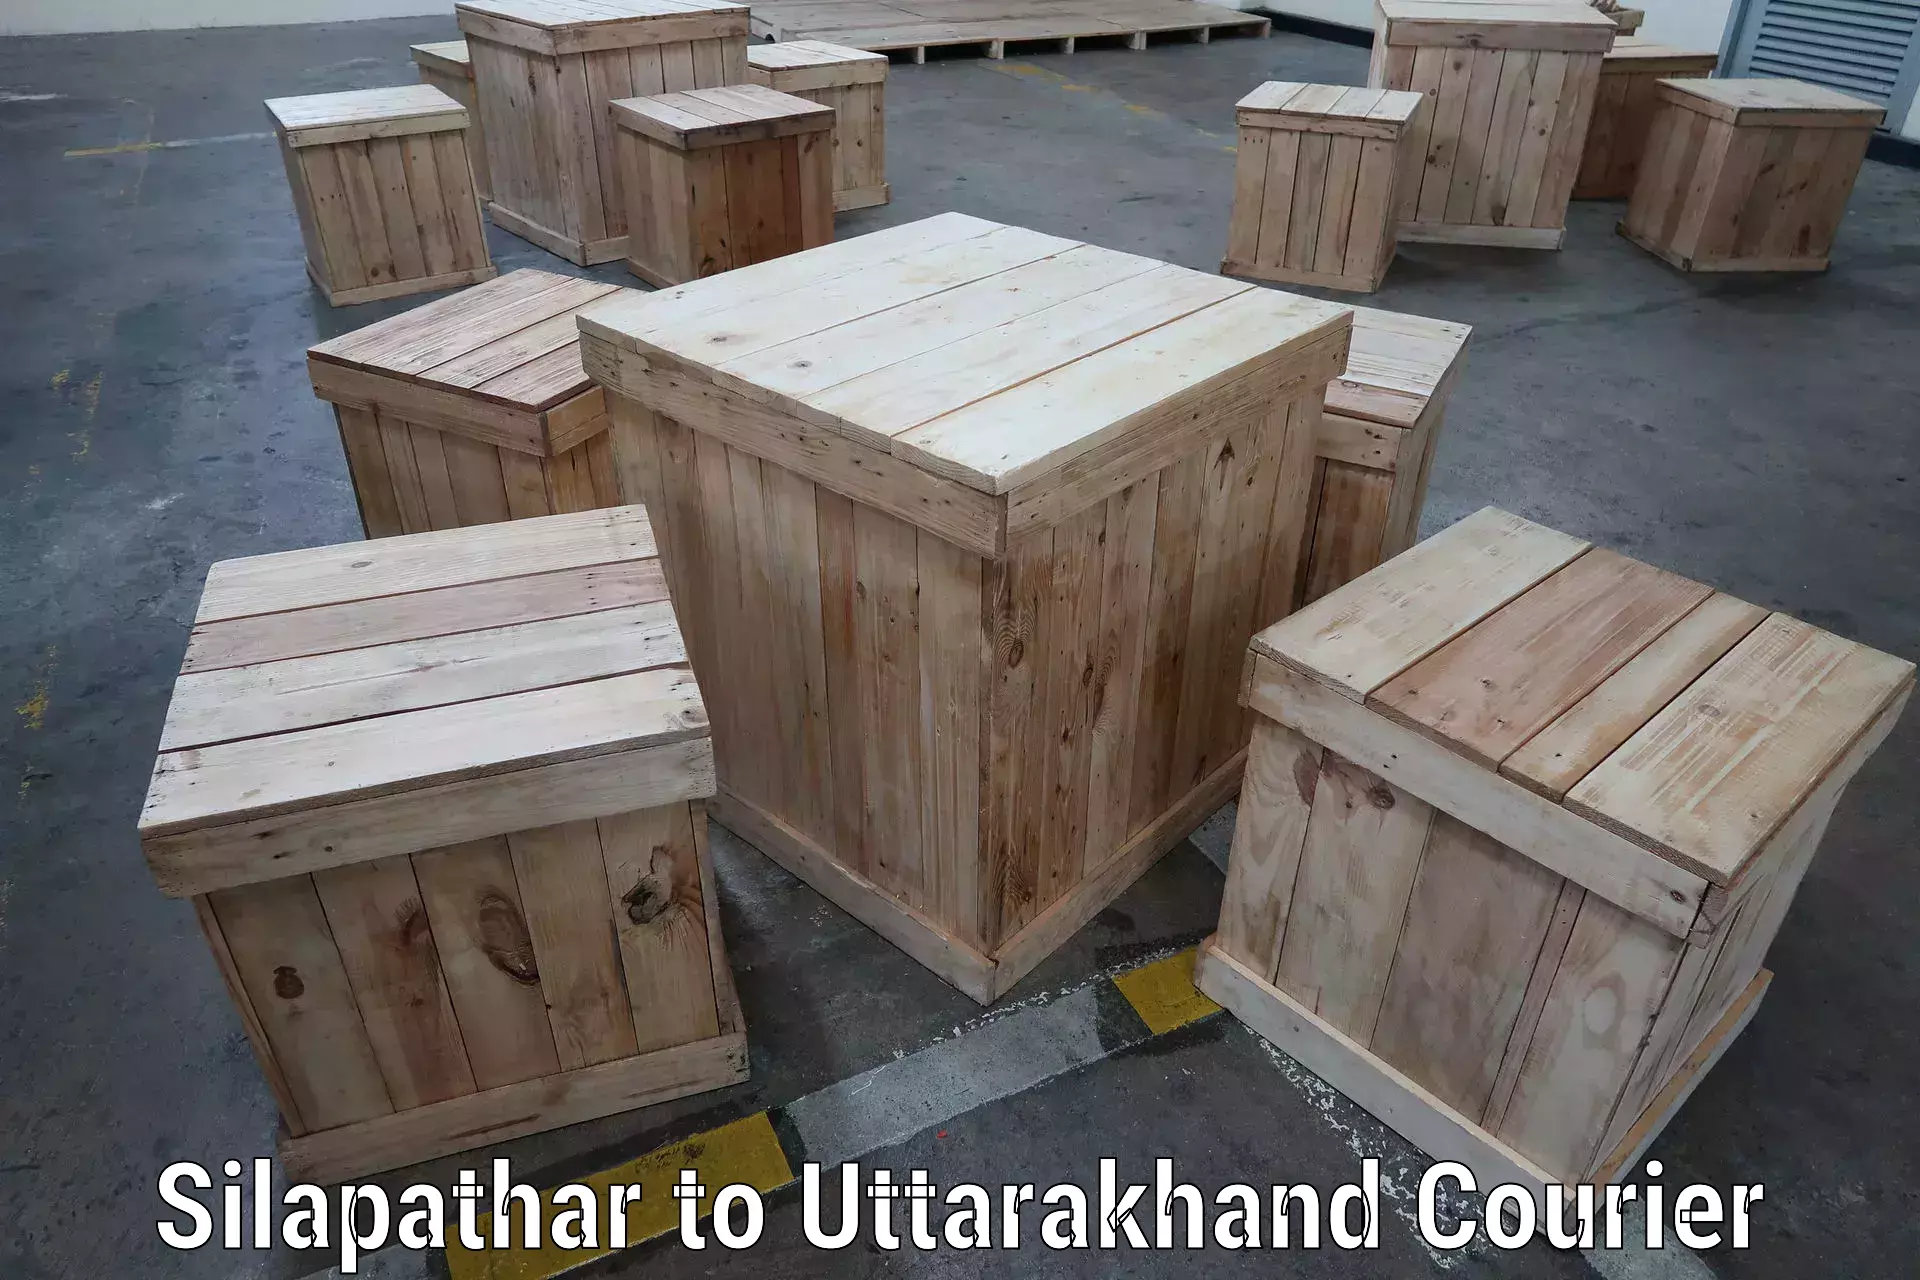 Seamless shipping experience Silapathar to Tehri Garhwal